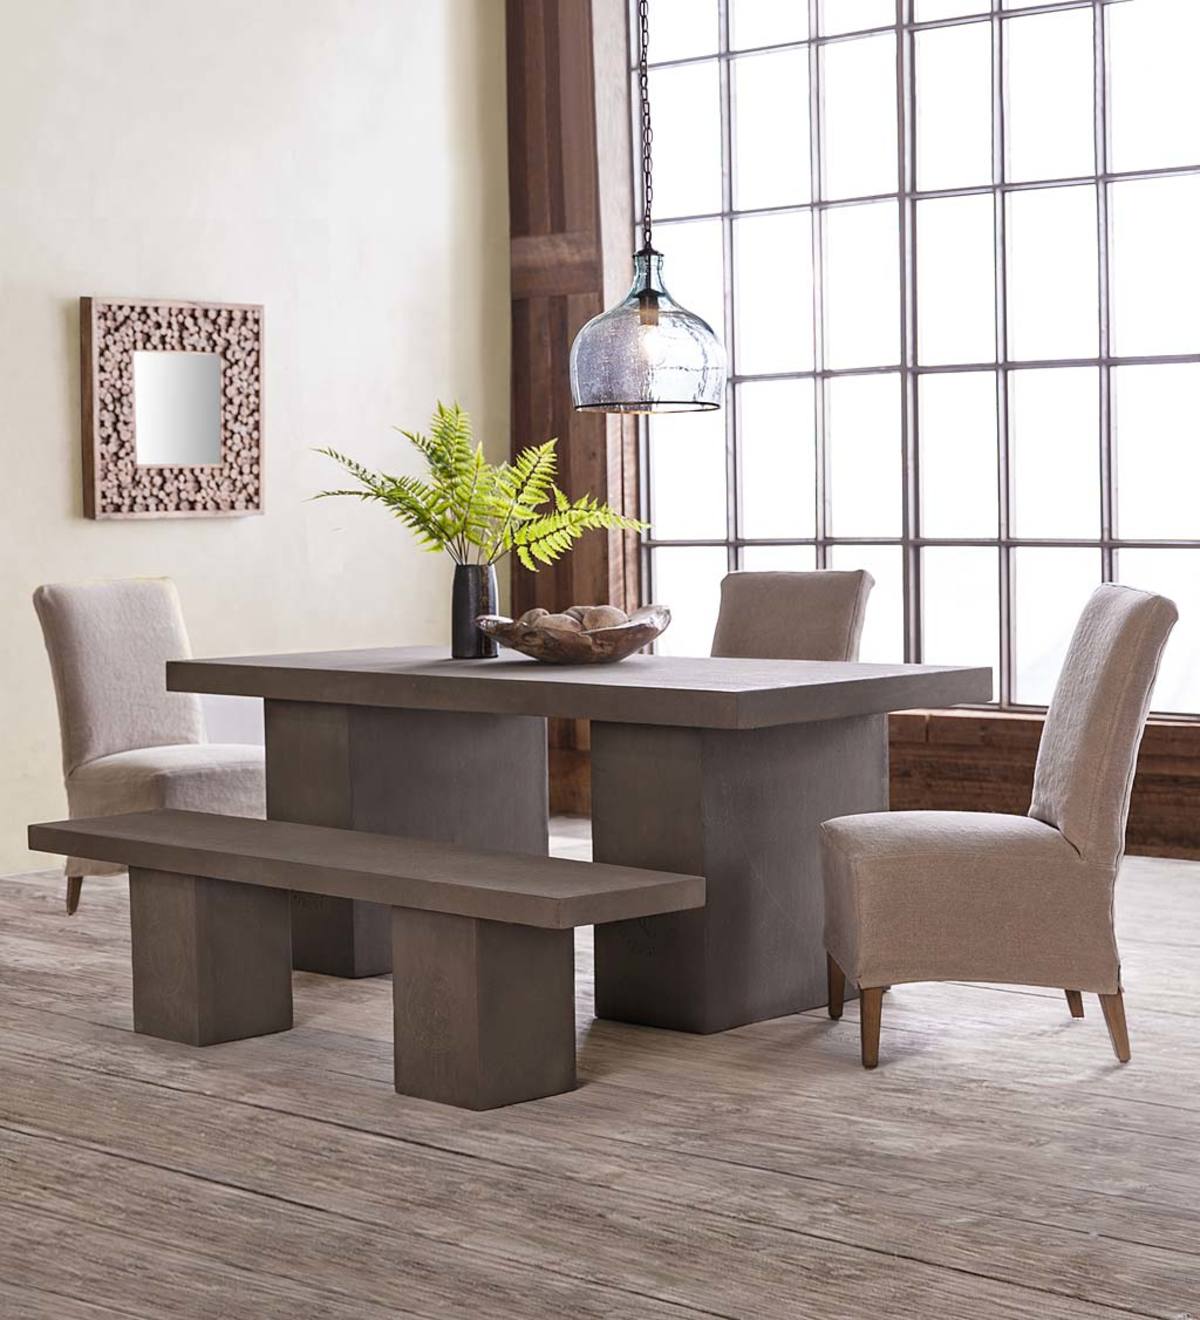 Urban Cement Company™ Dining Collection